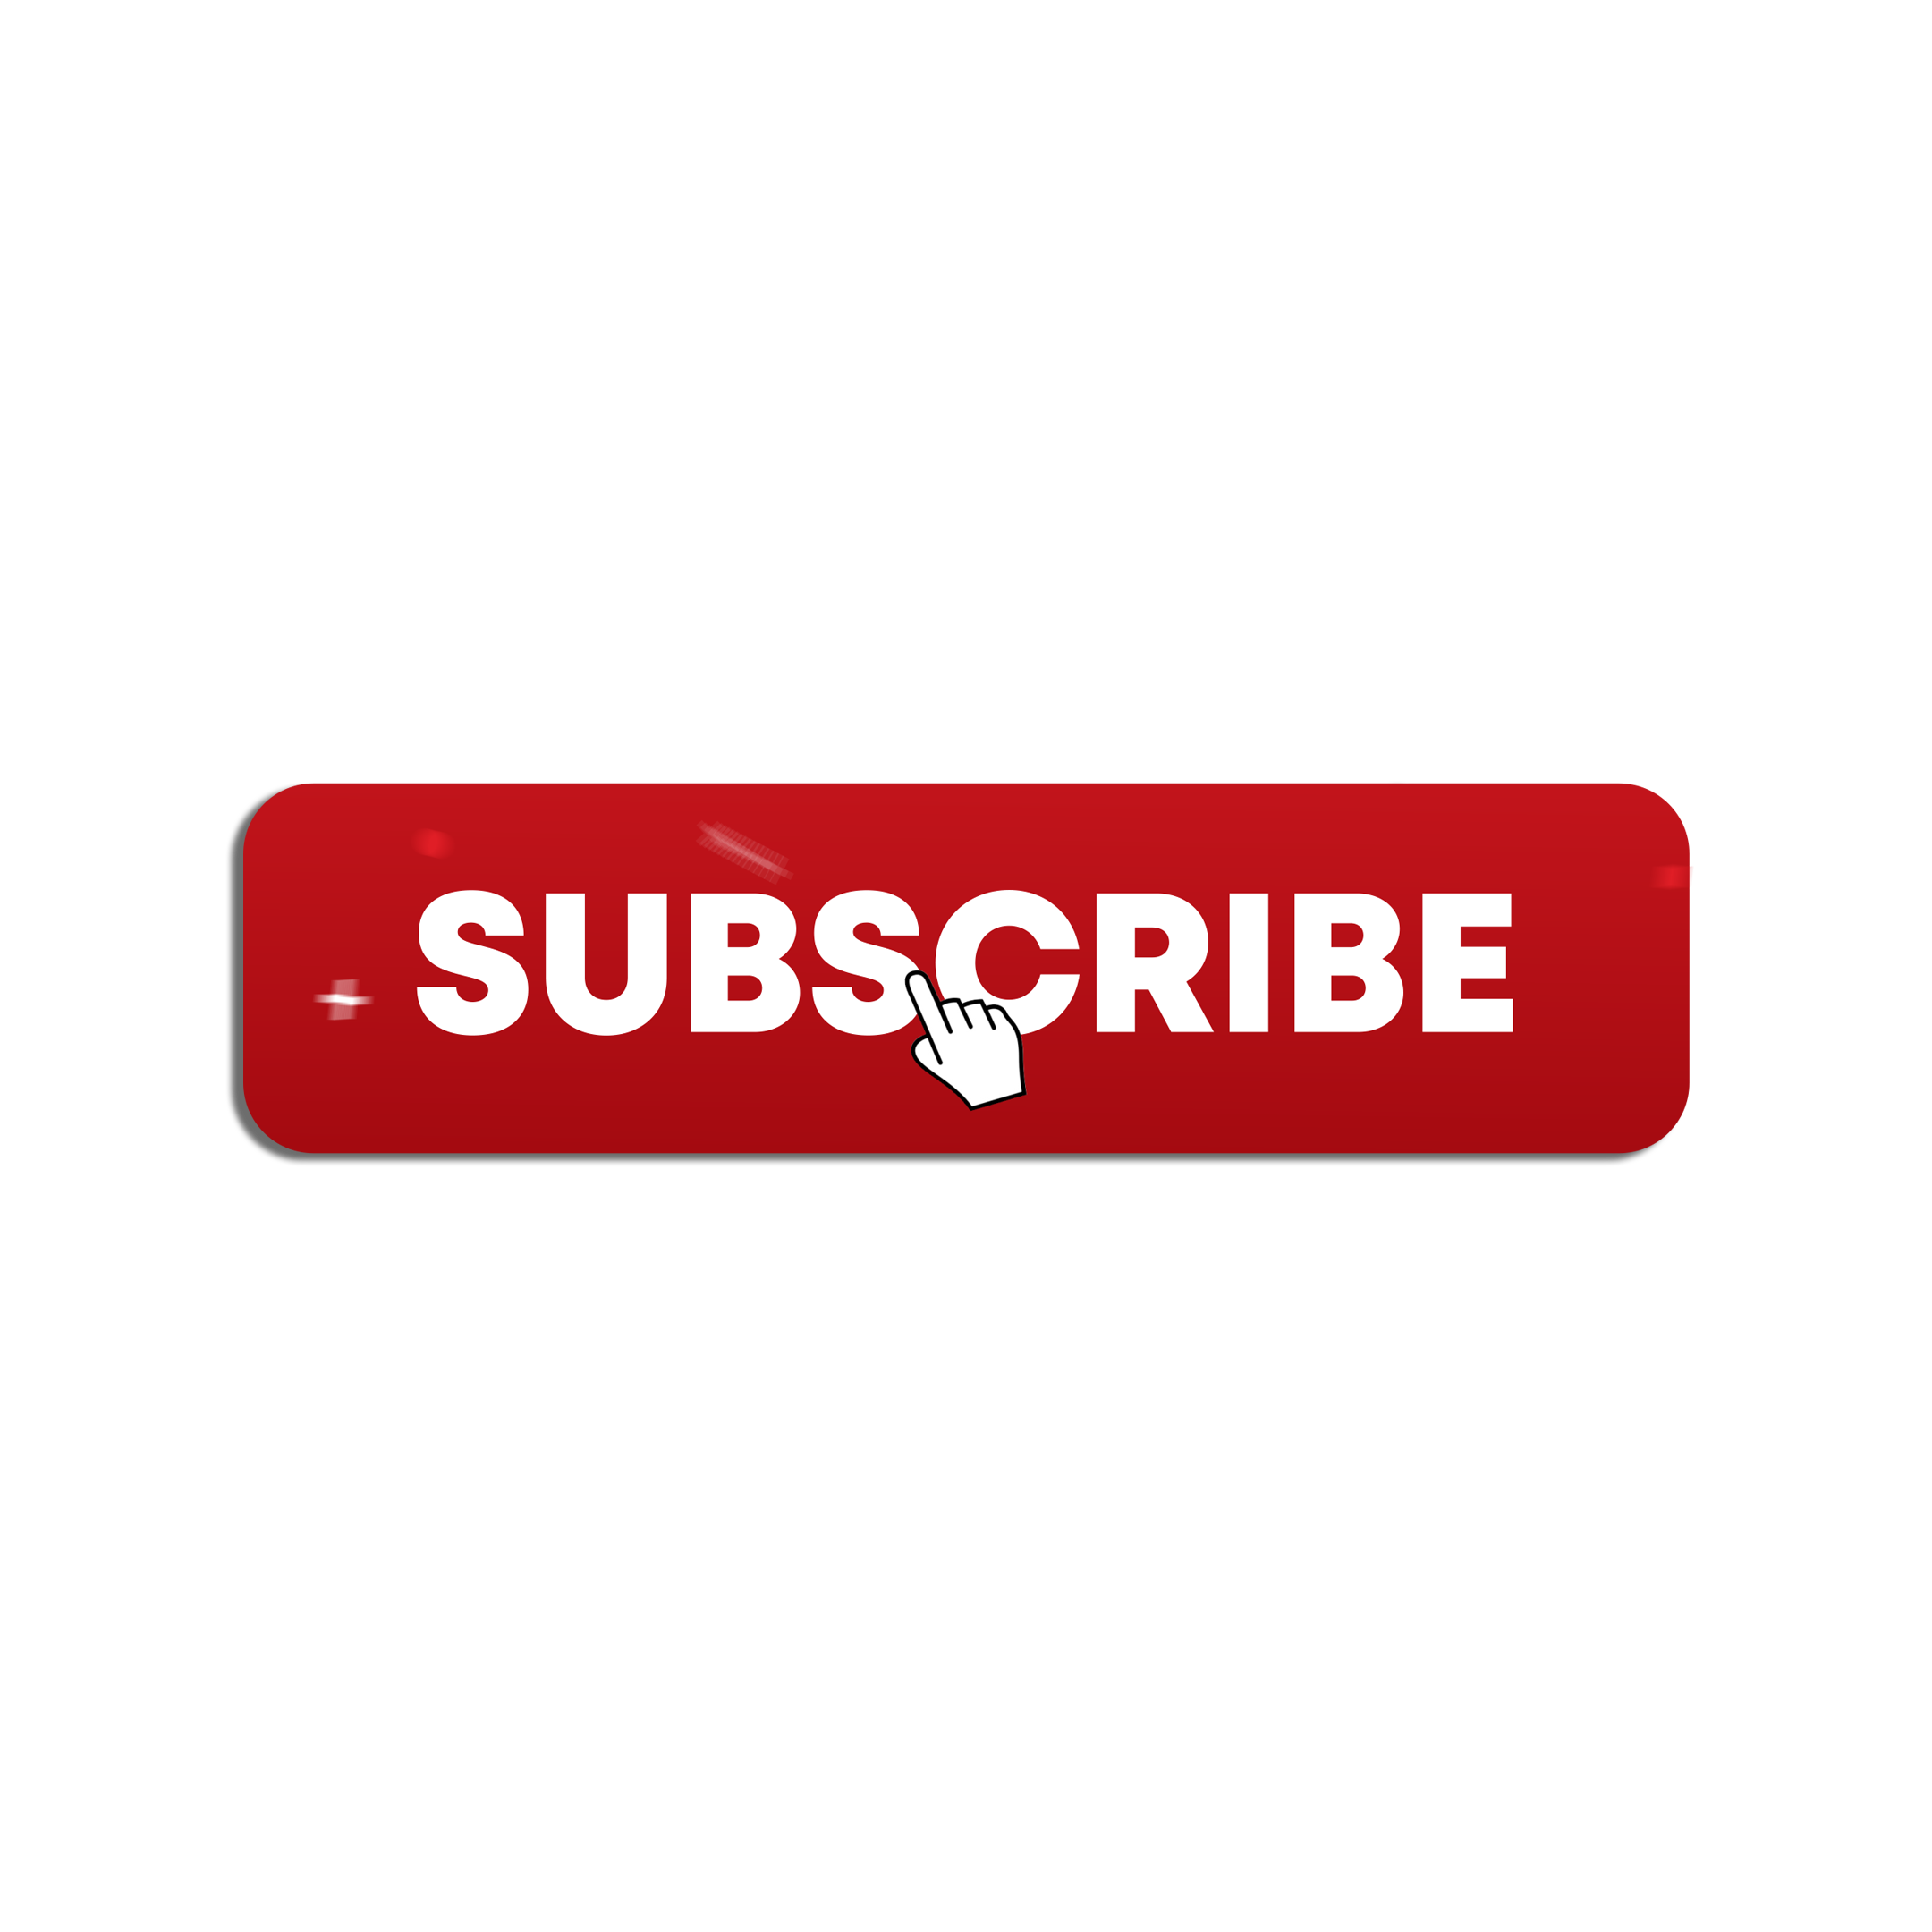 Youtube Subscribe Button Png File Png Mart Riset